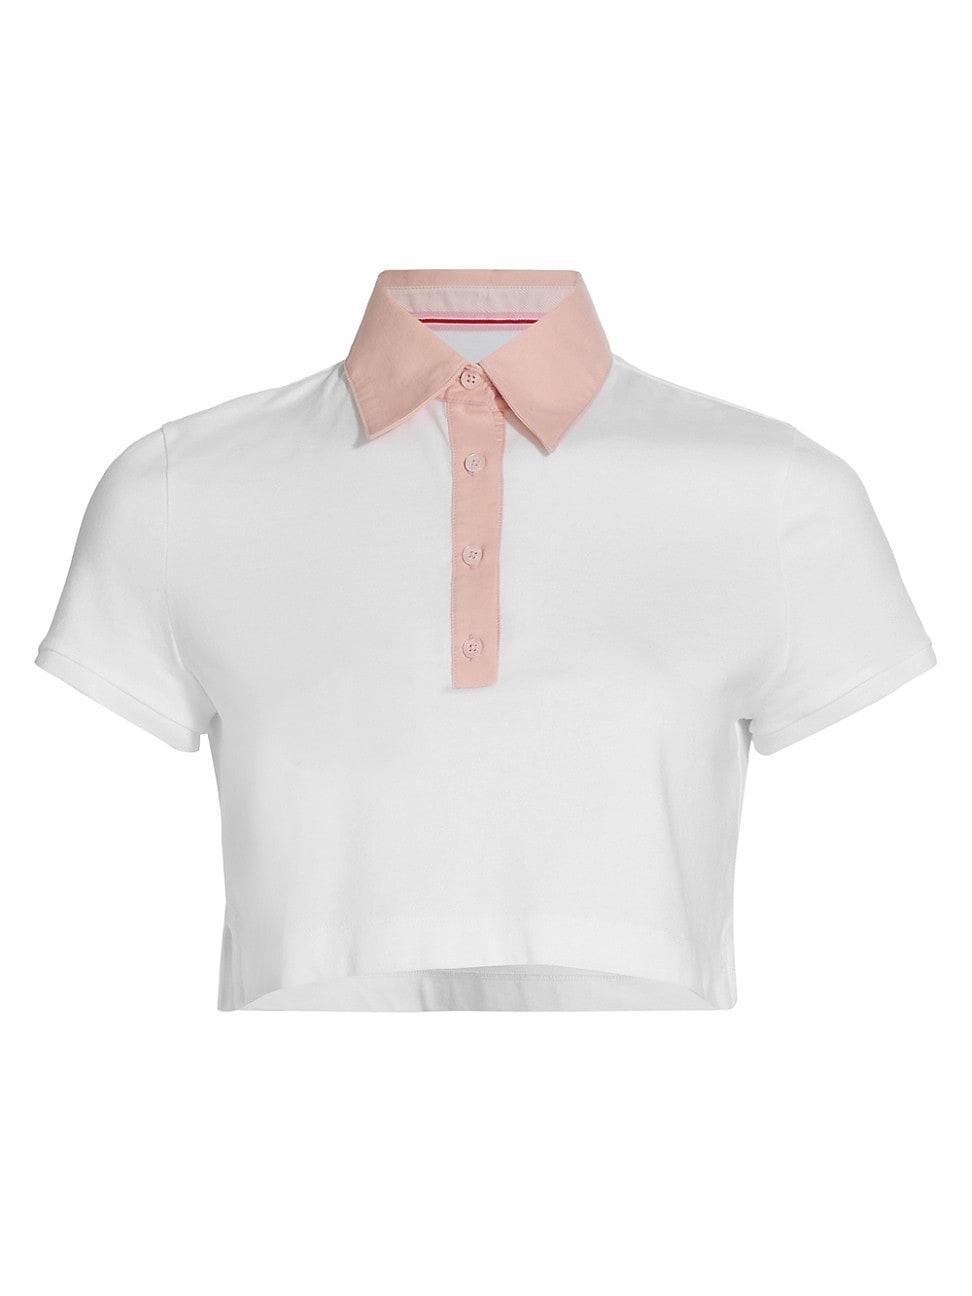 Alice + Olivia Kit Cropped Polo Shirt in White | Lyst